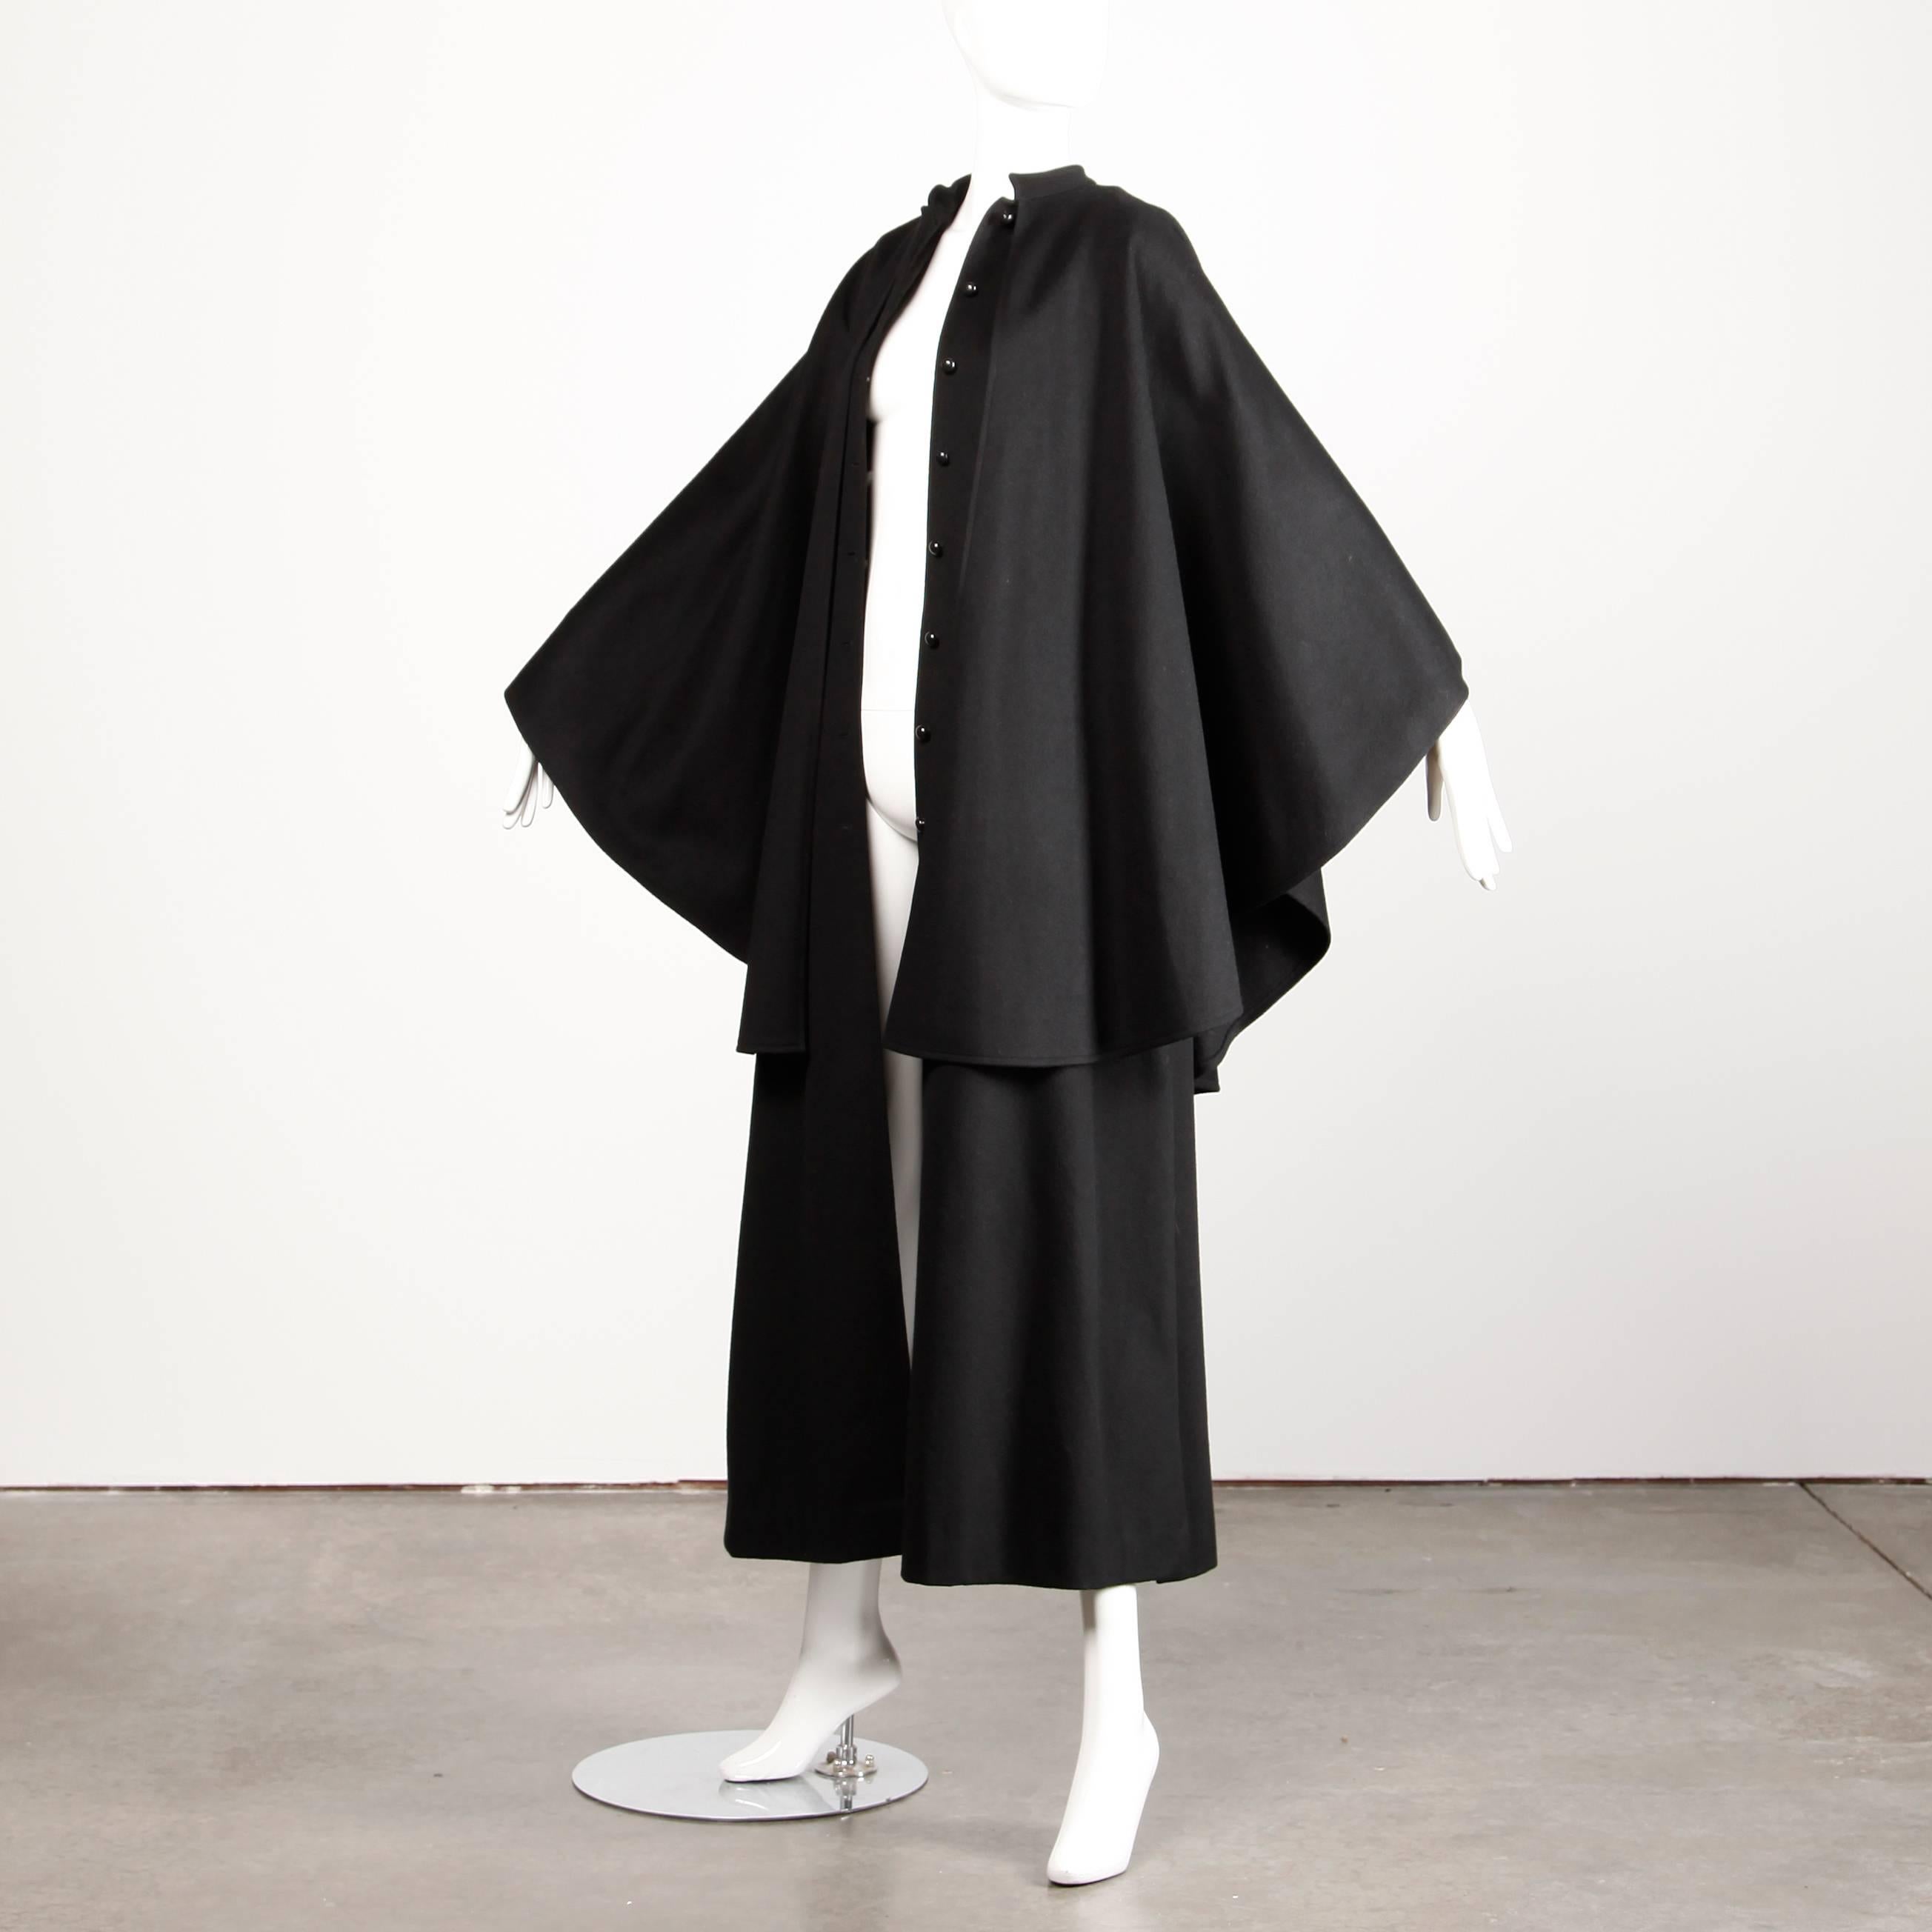 Completely amazing heavy black wool cape coat by Saint Laurent from the 1970s. The cape features two layers with giant batwing sleeves and front button closure. Long maxi length. Early Rive Gauche label.

Details: 

Unlined
Side Slit